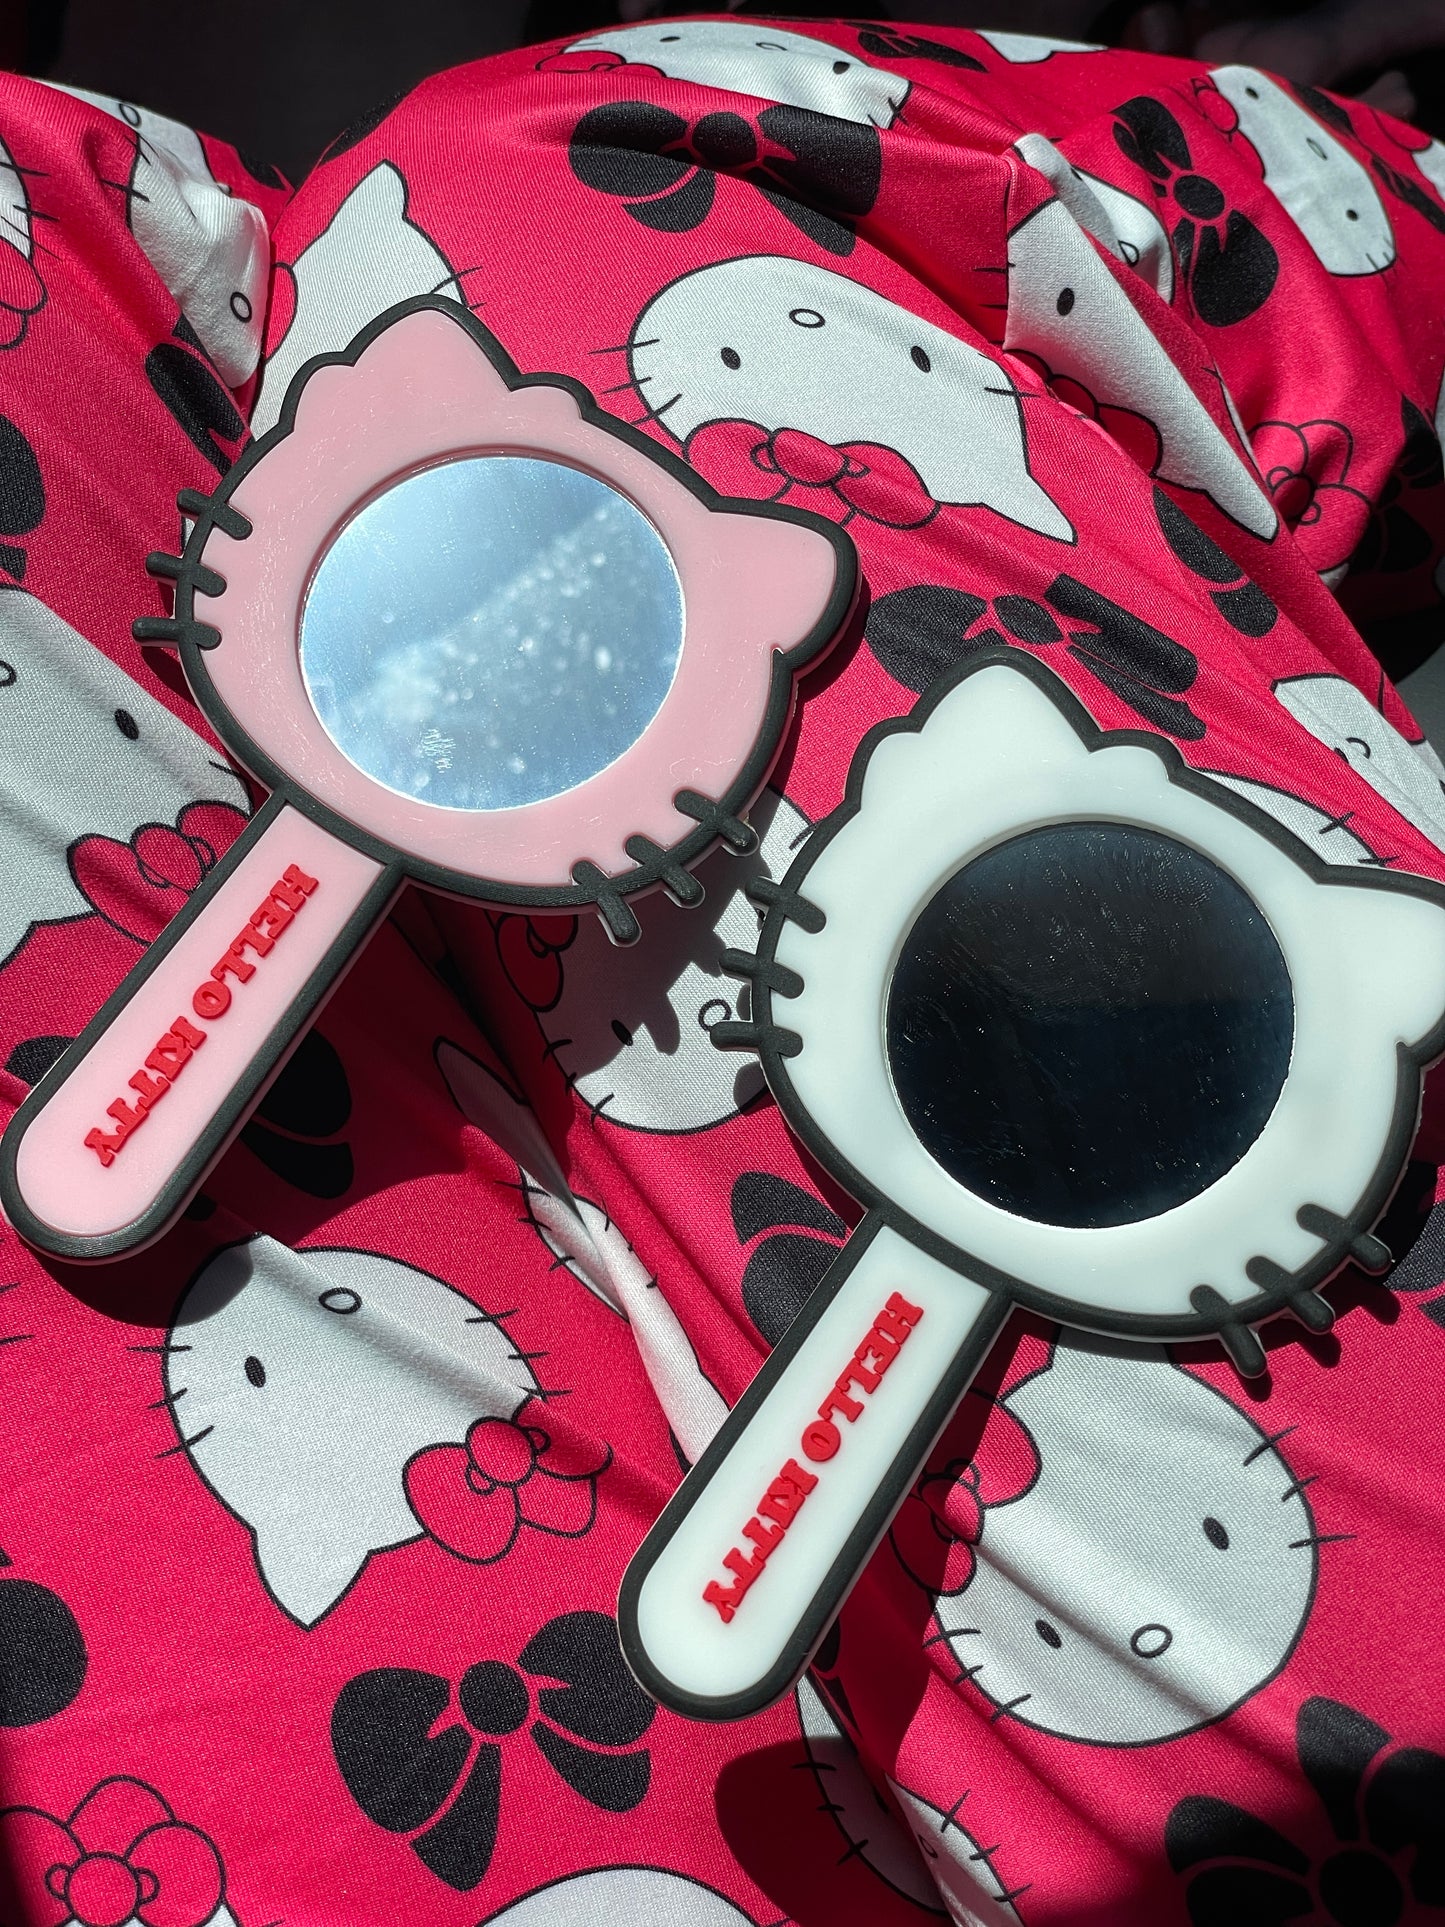 Hellokitty Travel Handheld Silicone Mirror Portable Personal Cosmetic Hand Mirror